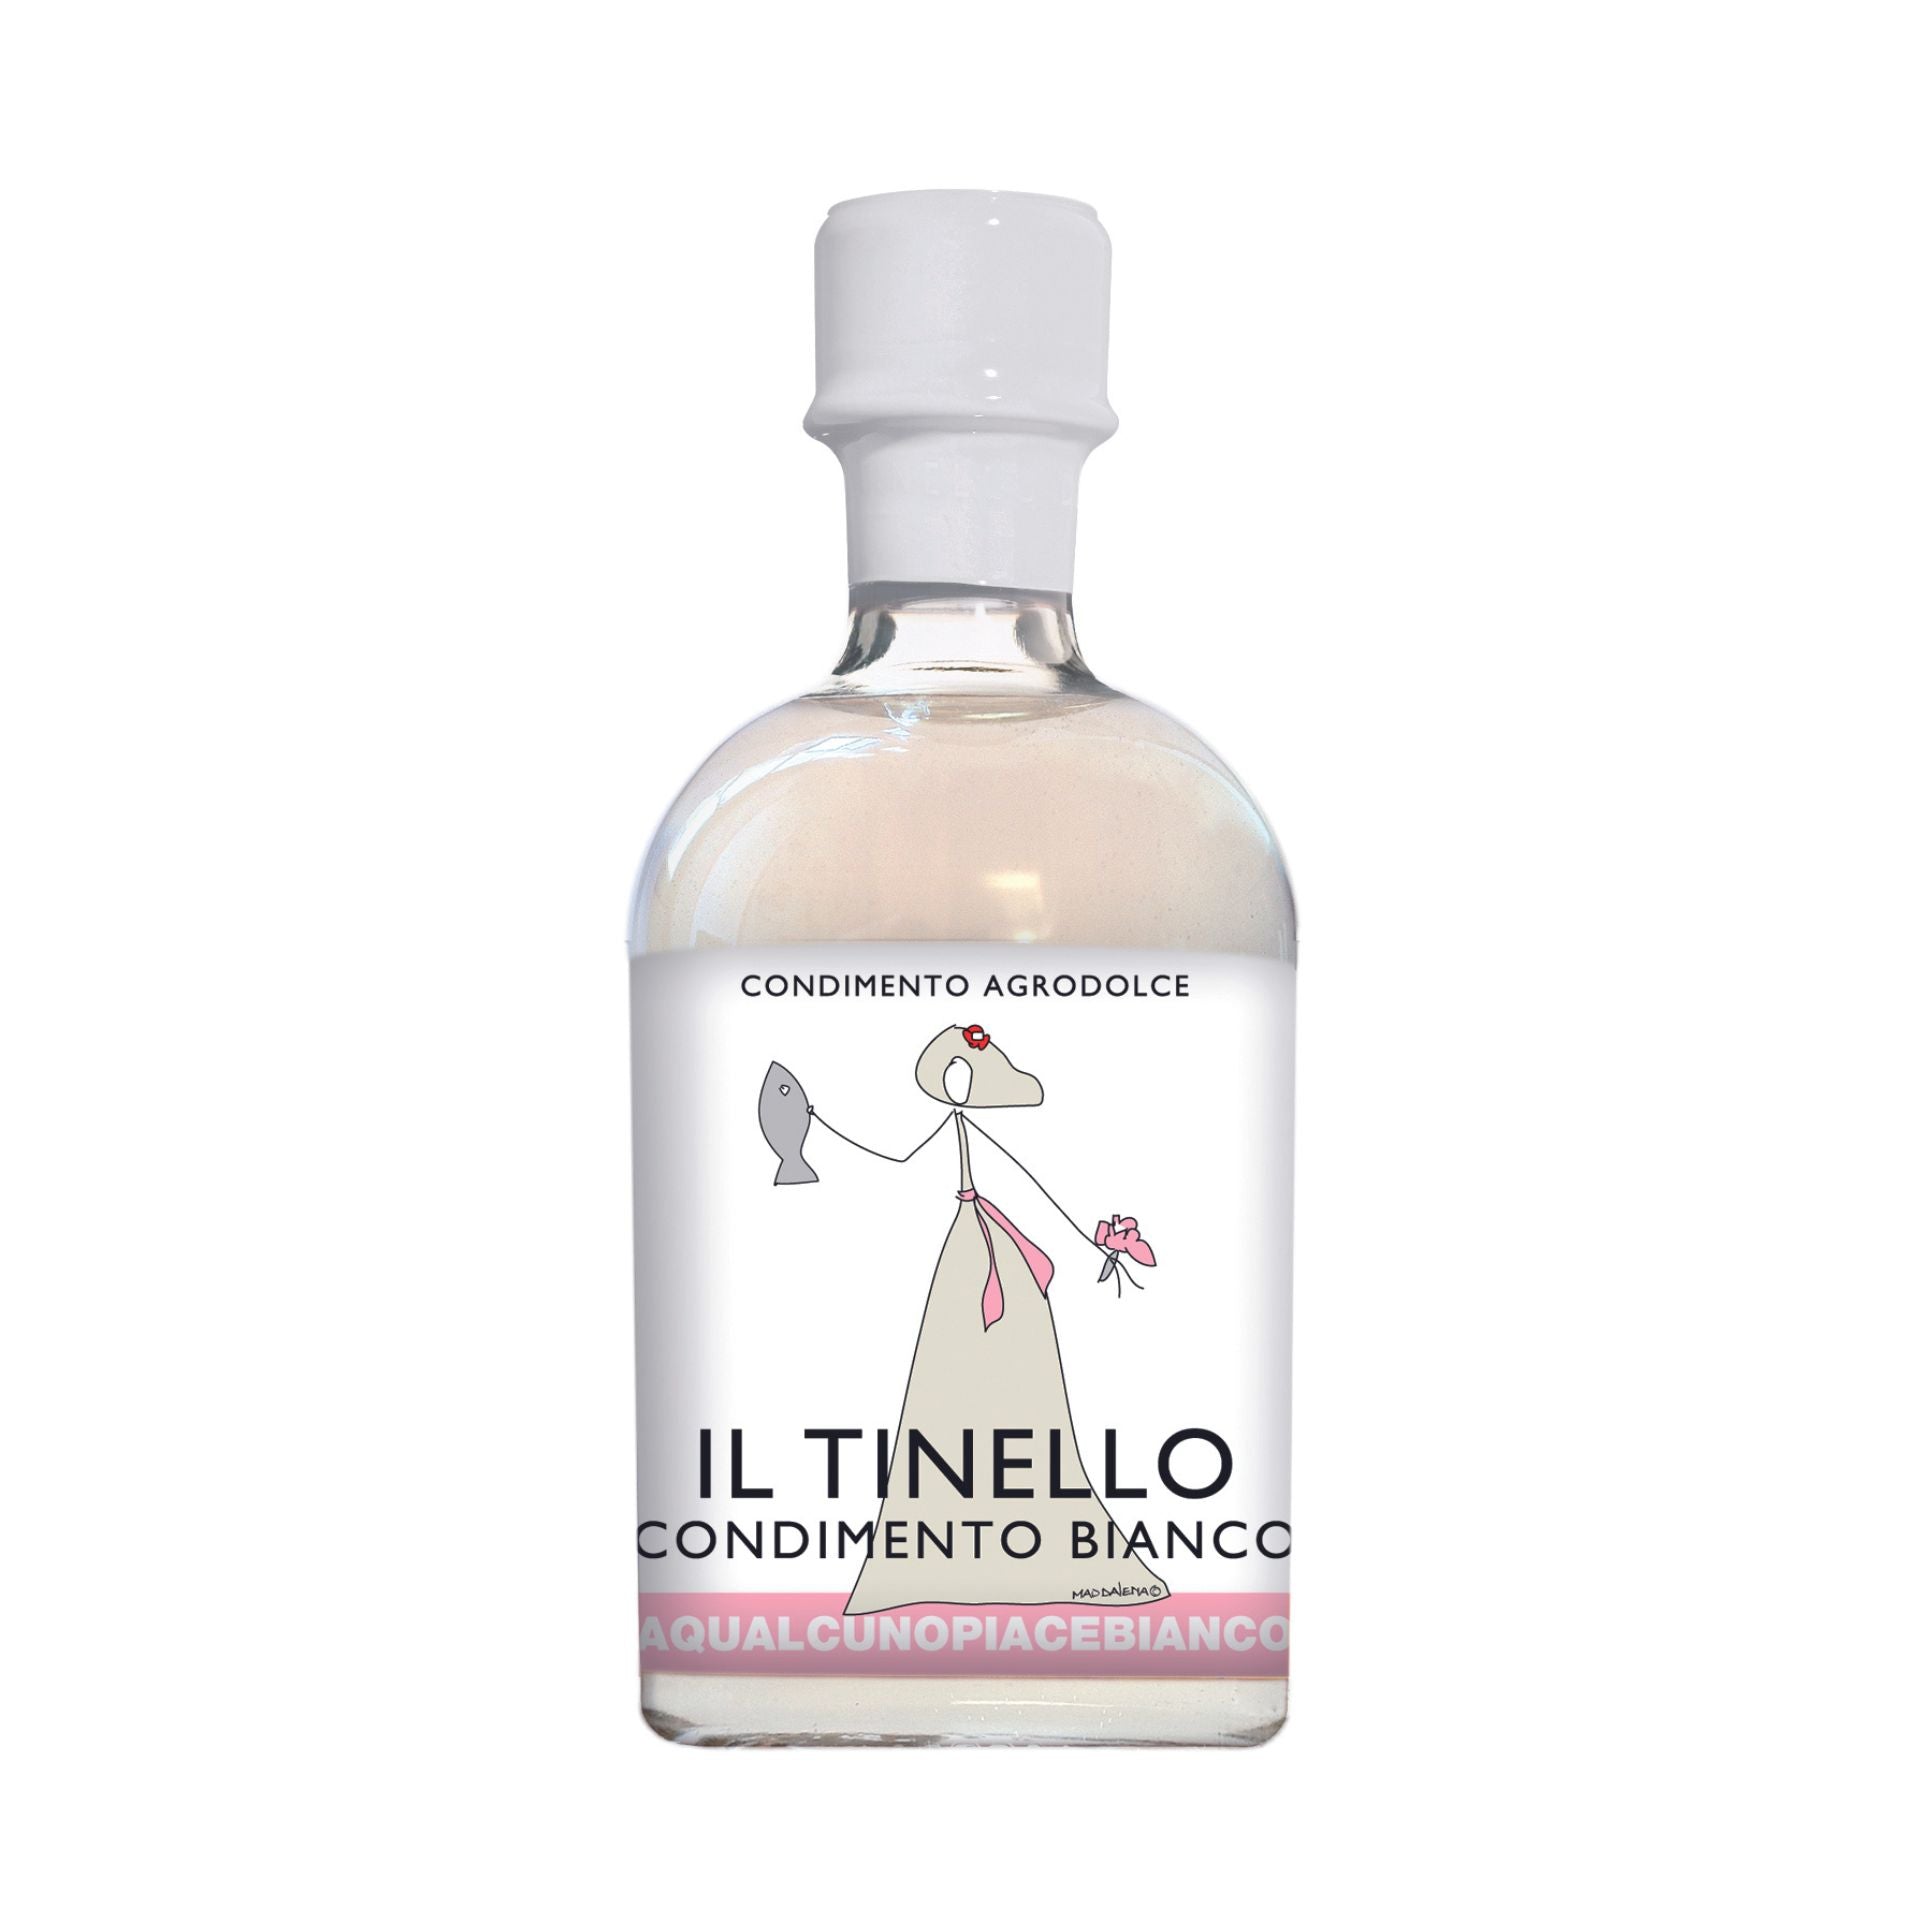 Il Borgo del Balsamico Il Tinello White Grape Juice Condiment 250ml  | Imported and distributed in the UK by Just Gourmet Foods